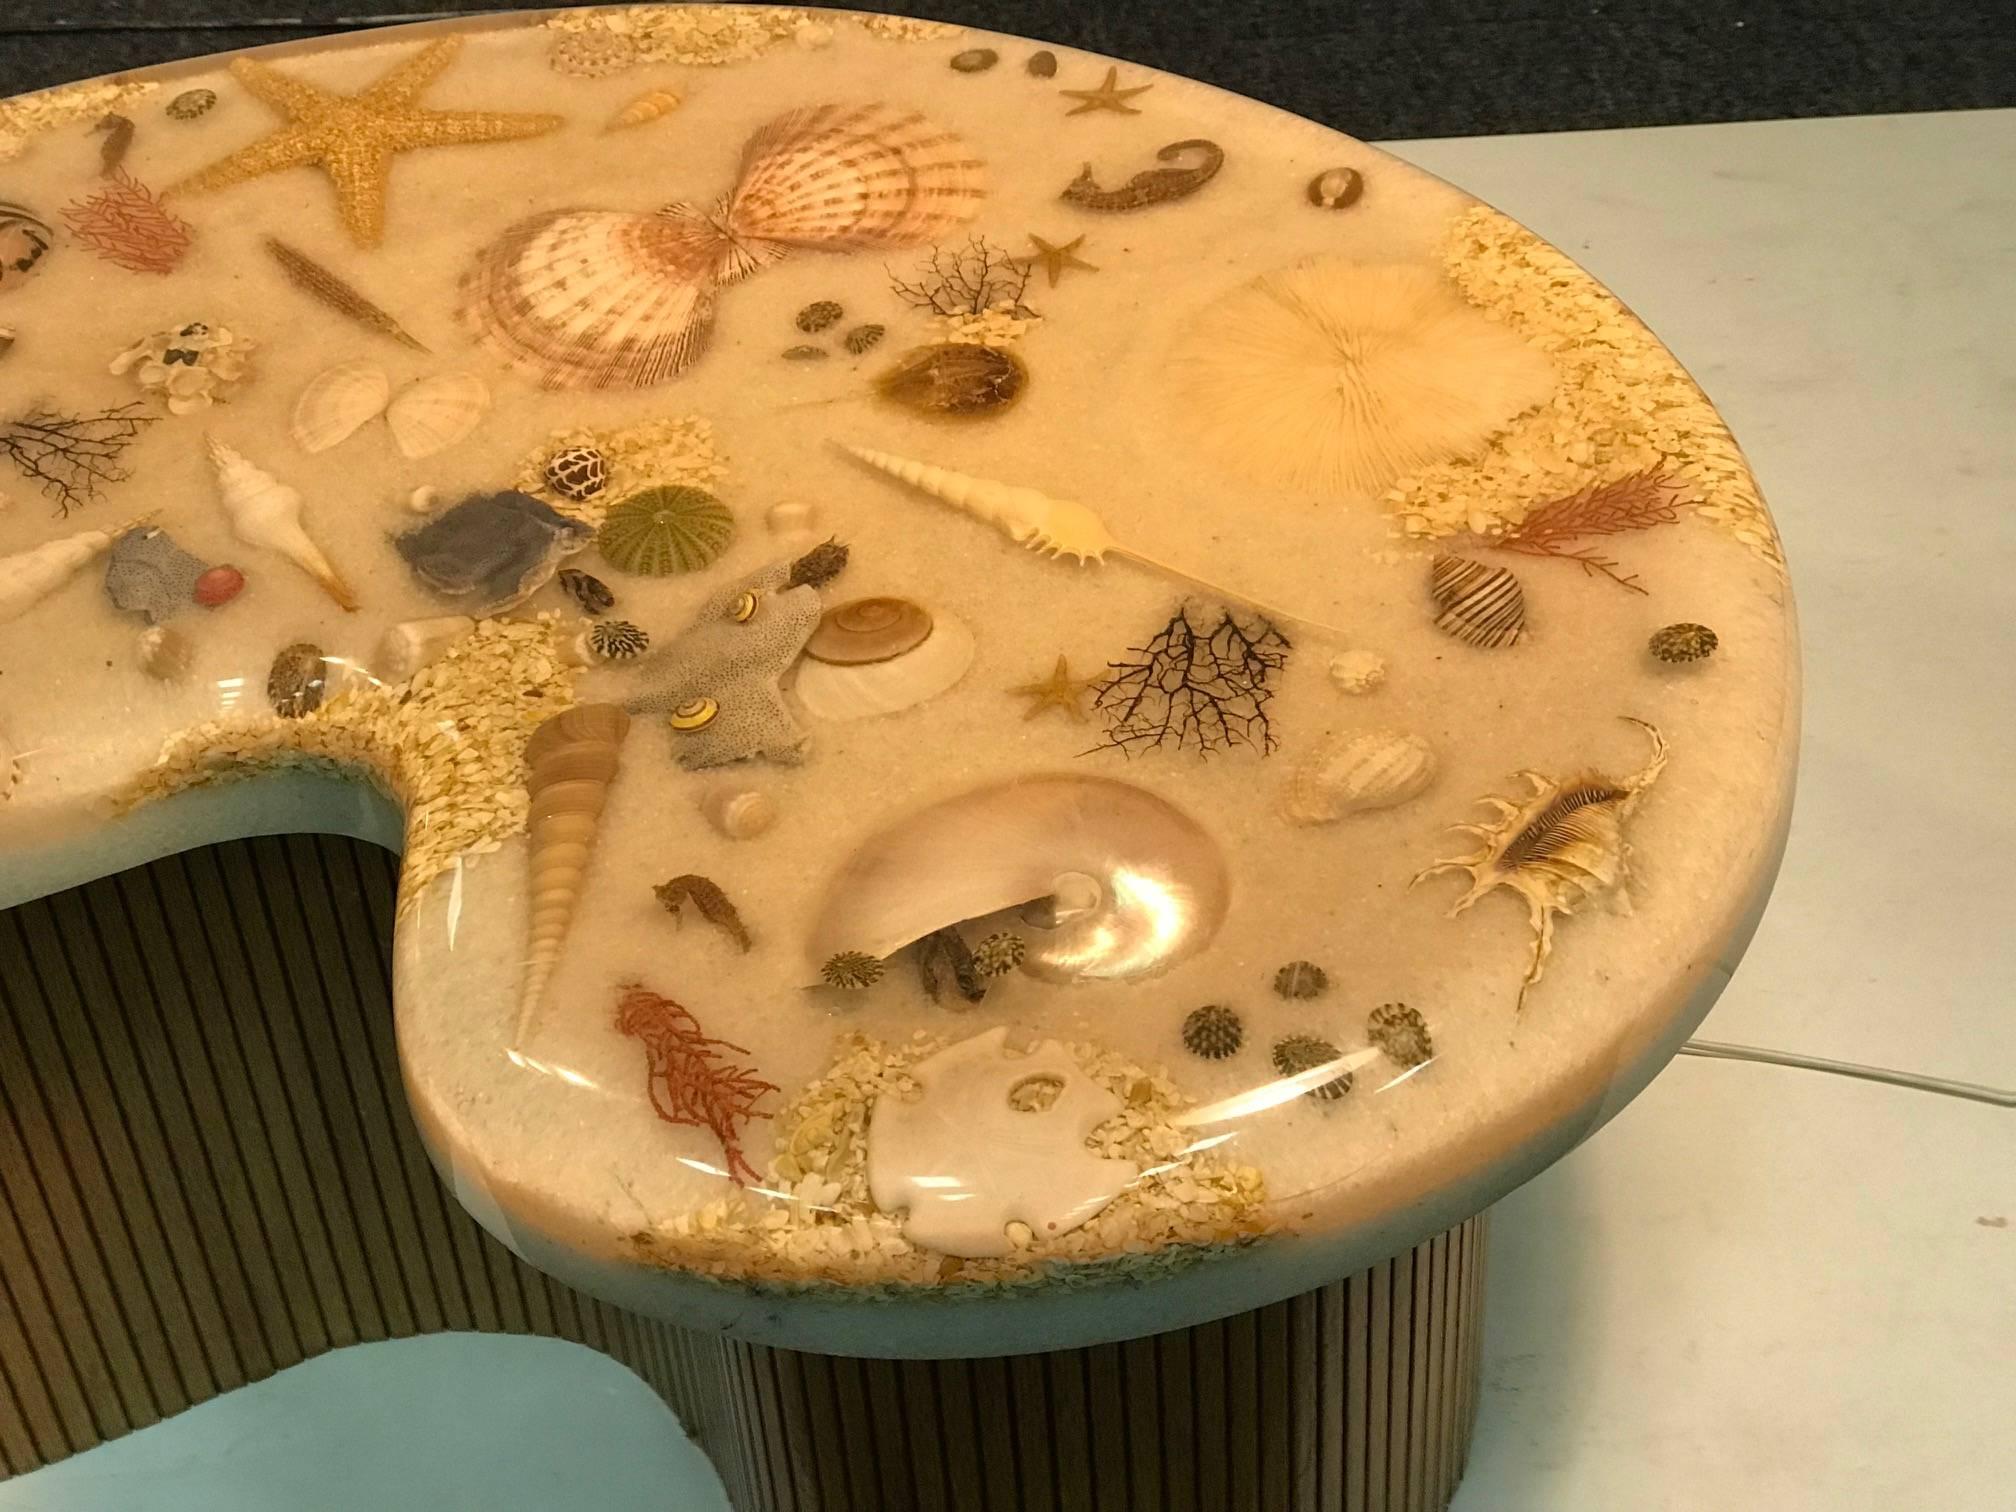 Unique Exotic Sea Shells ,Various Starfish and Other Sea Creatures With Sand Encased in A Biomorphic Resin top on Blonde Wood Slatted Base Coffee Table. Designed Circa 1990's By Joe Twombly.